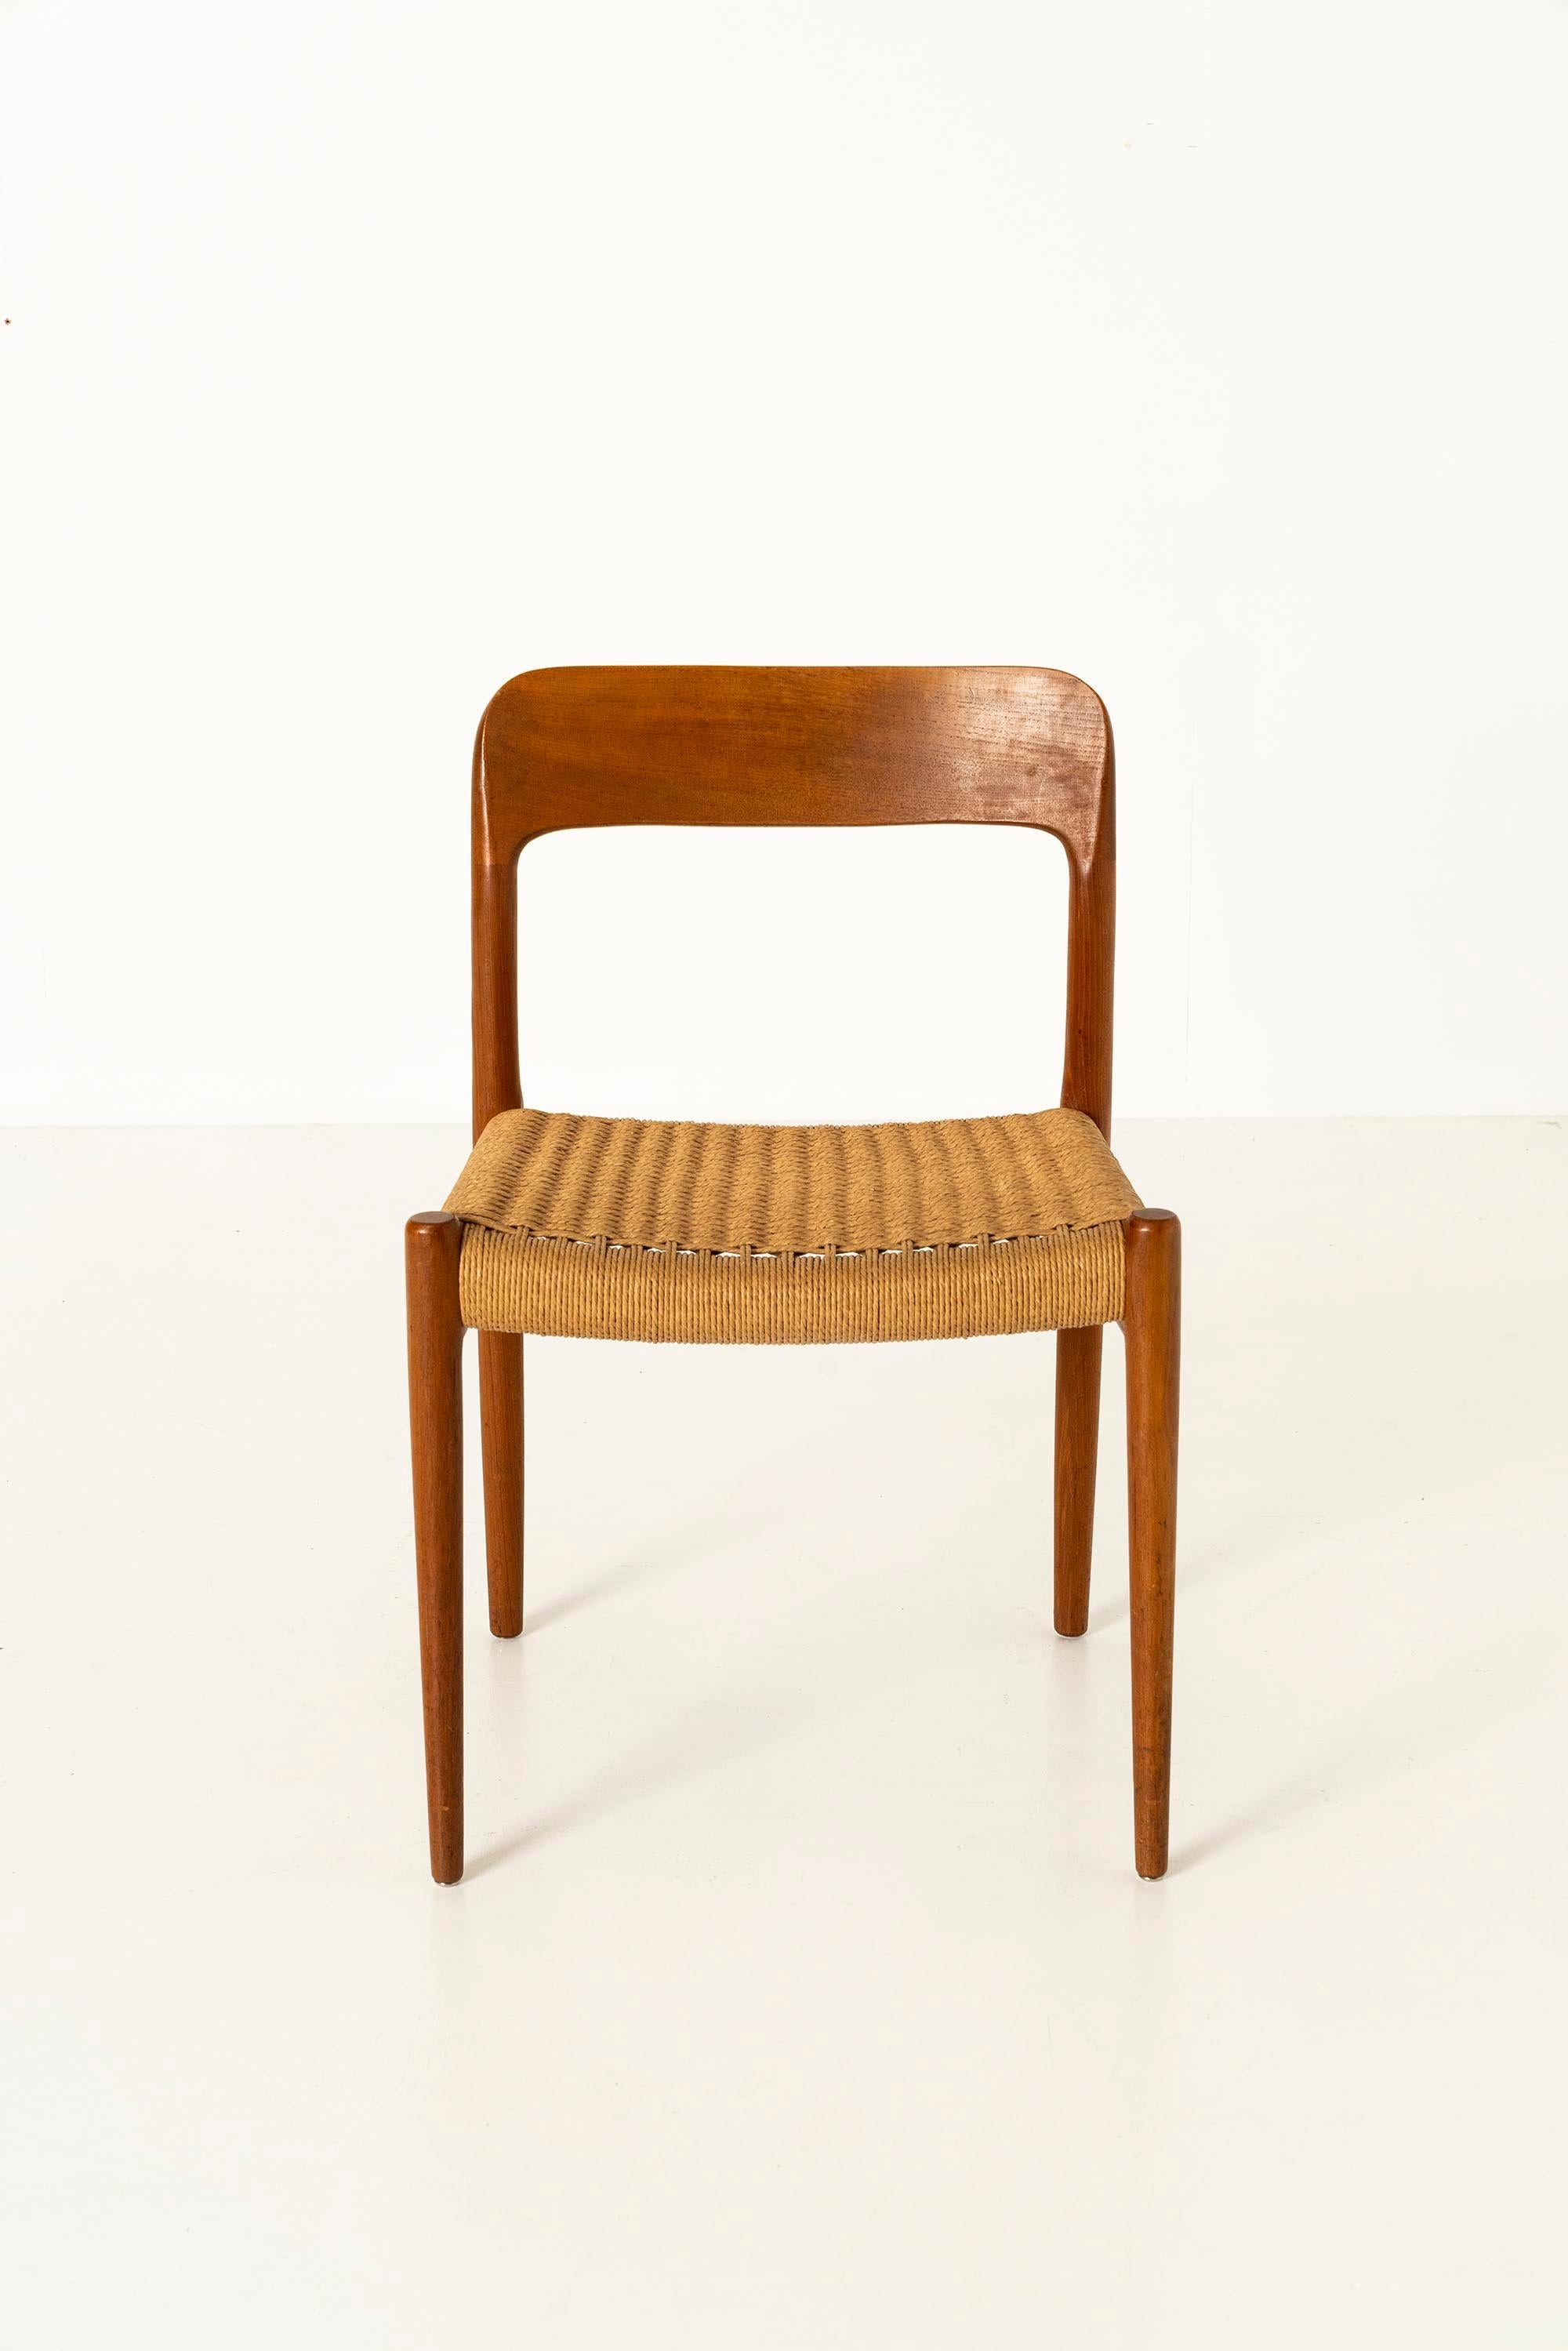 10 Niels Otto Møller 'Model 75' Chairs in Teak and Danish Paper Cord, 1960s For Sale 3